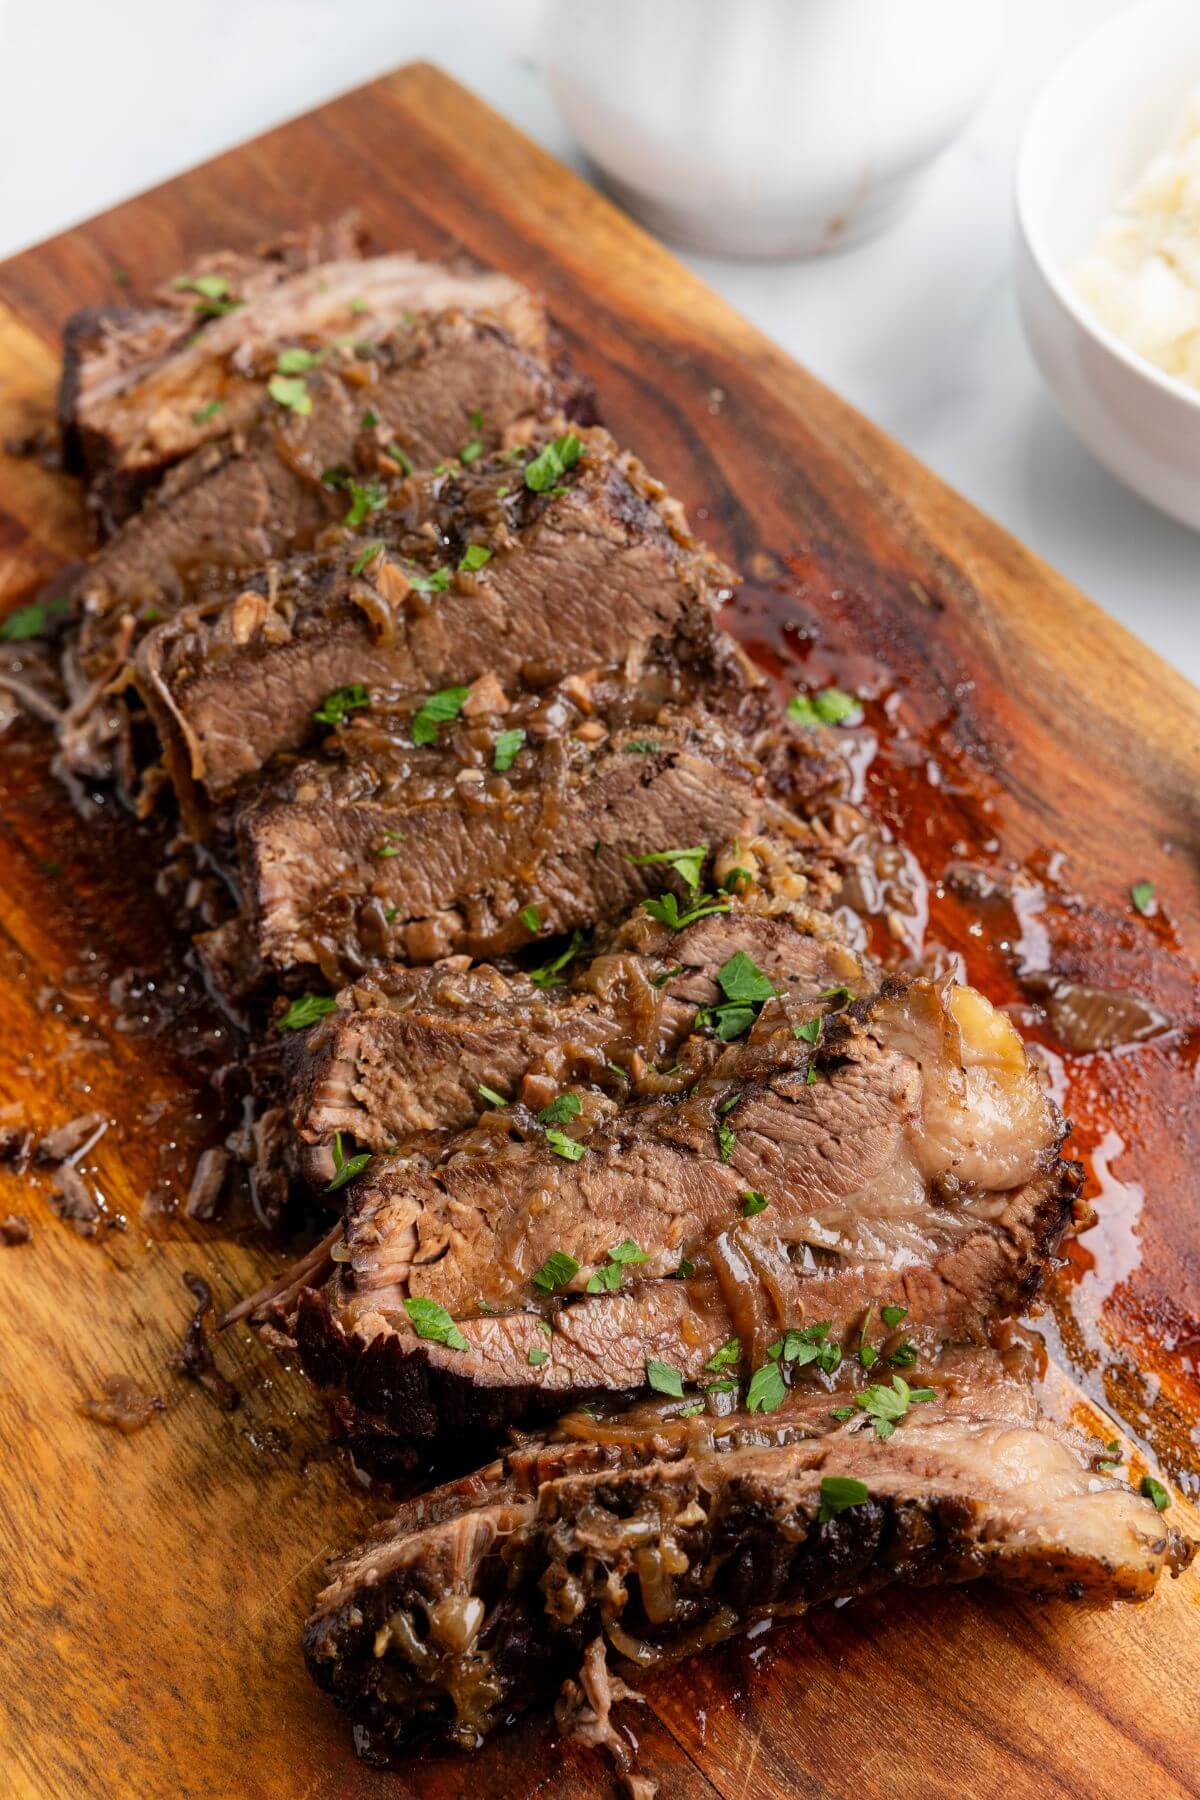 Cooked brisket is garnished with herbs on a wooden cutting board.